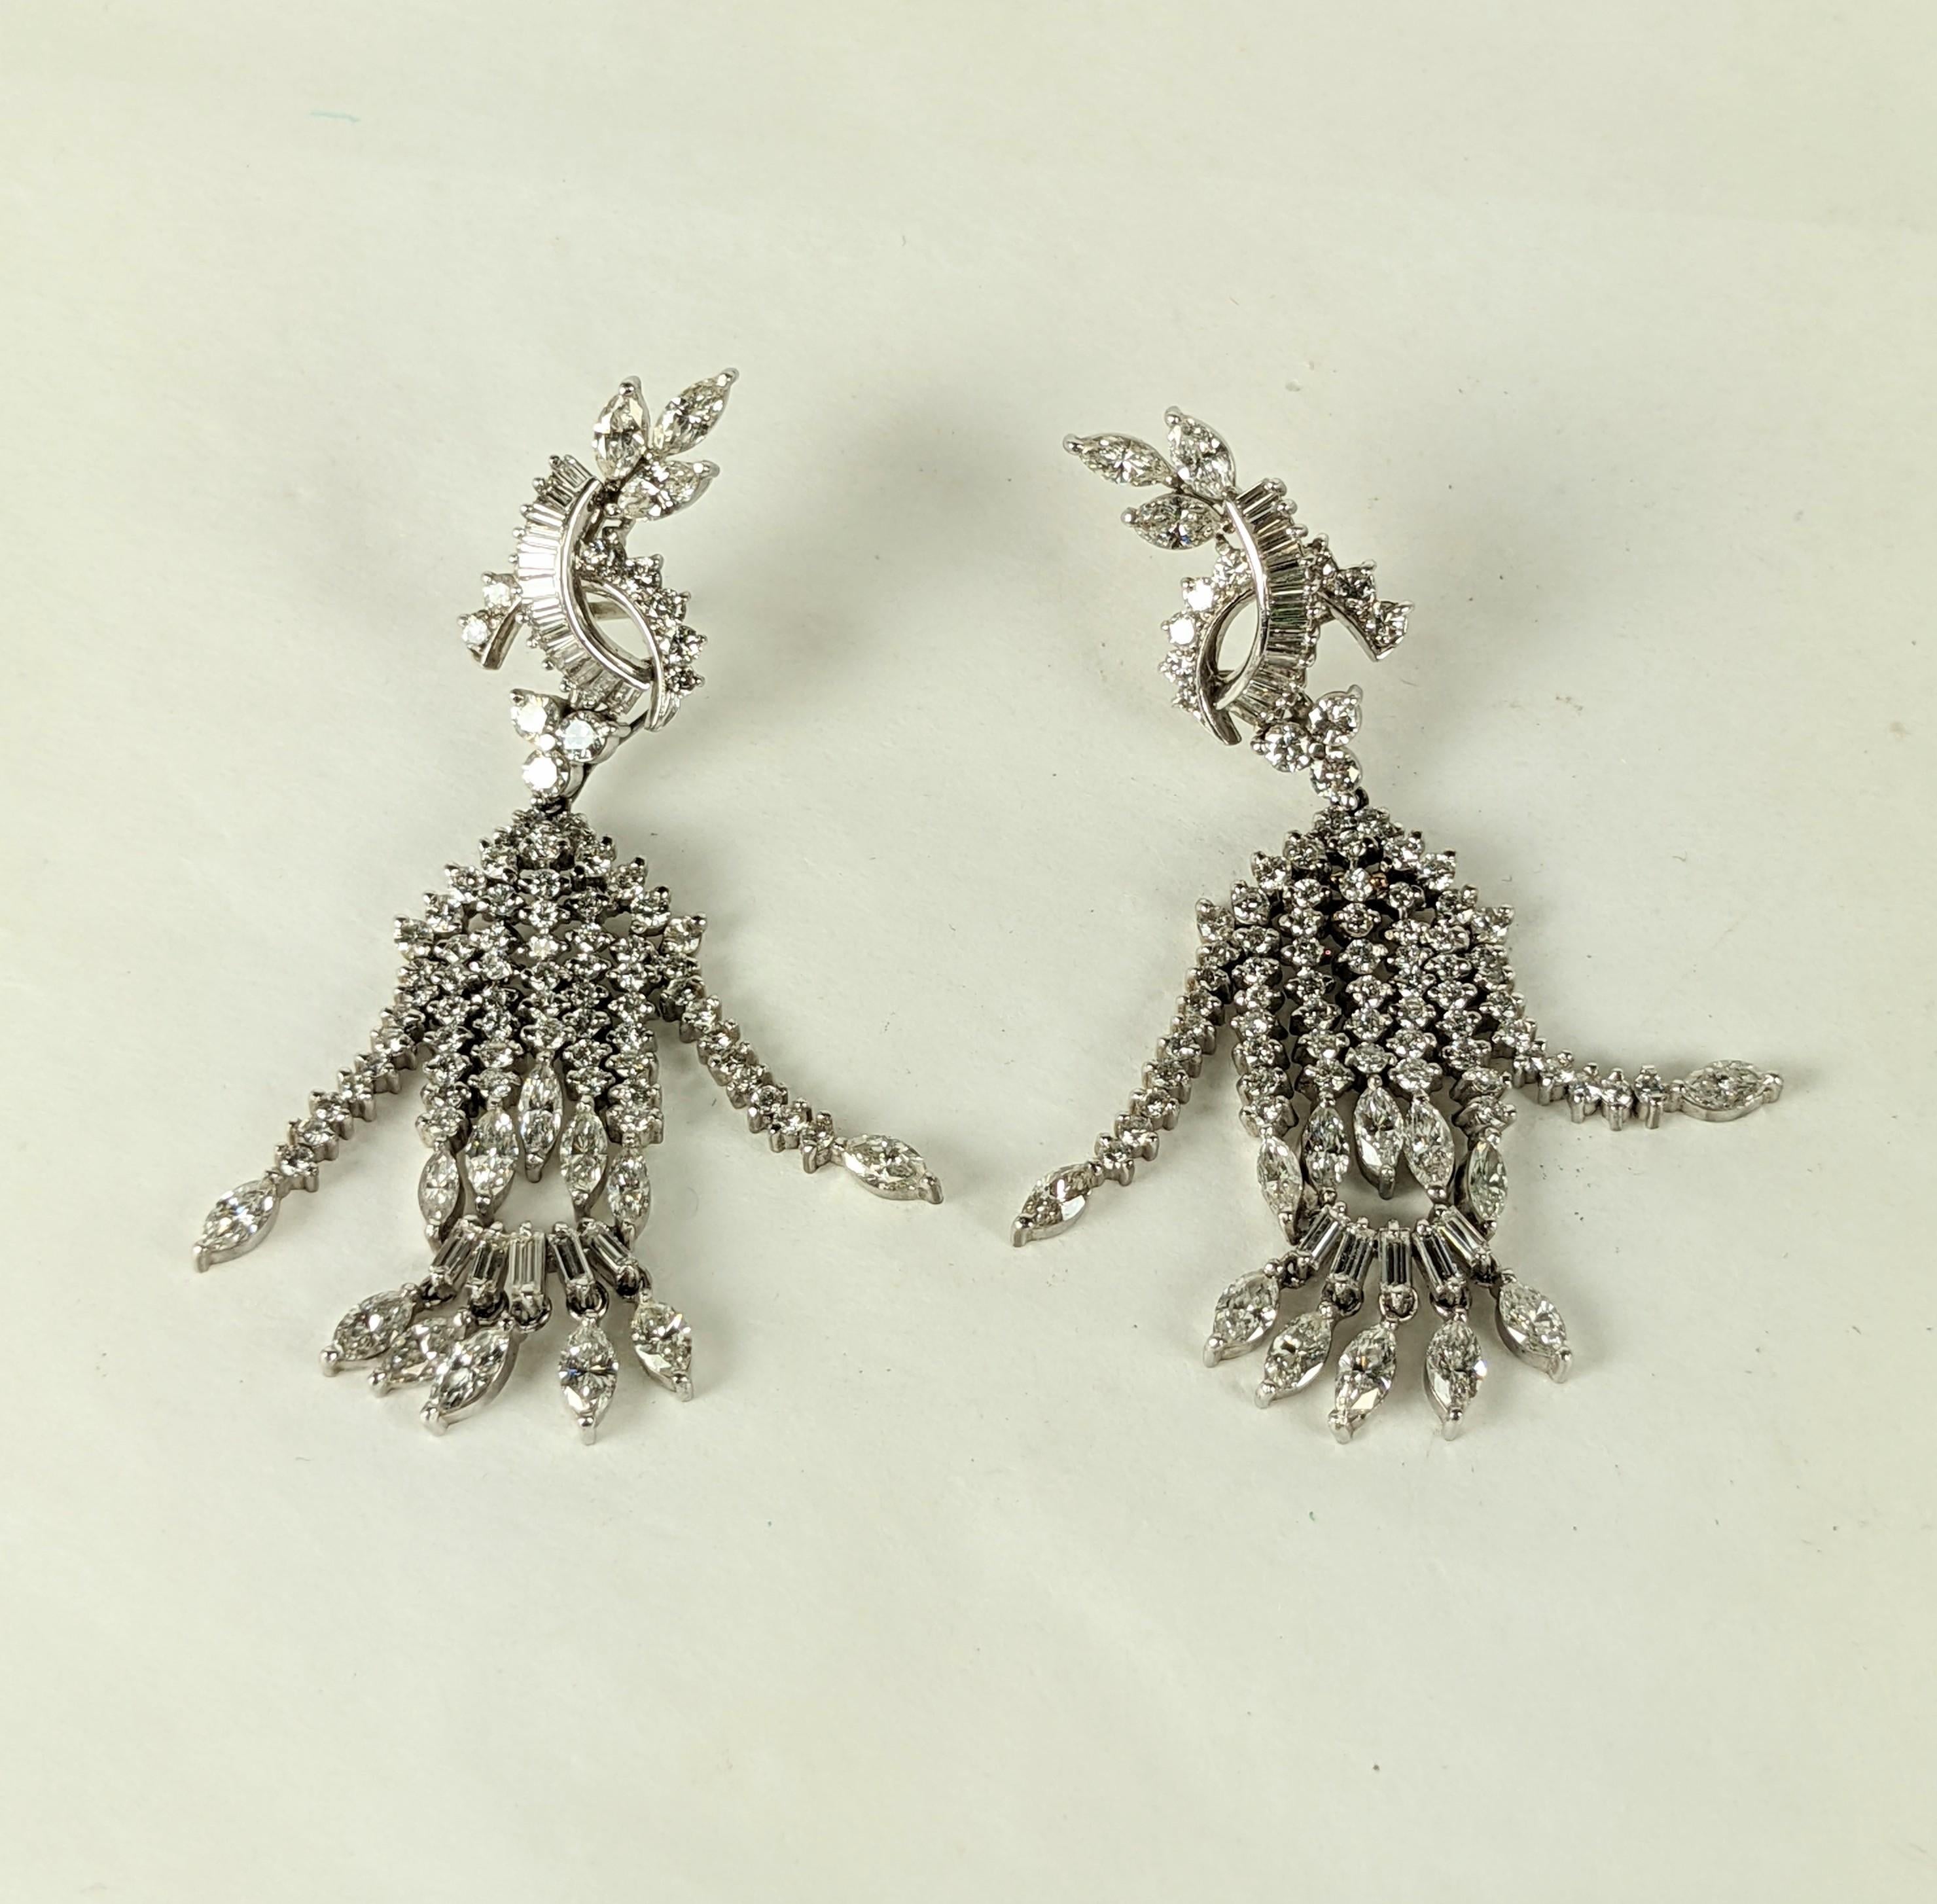 Marquise Cut Unique Surrealist Diamond Articulated Dangling Man Earrings For Sale